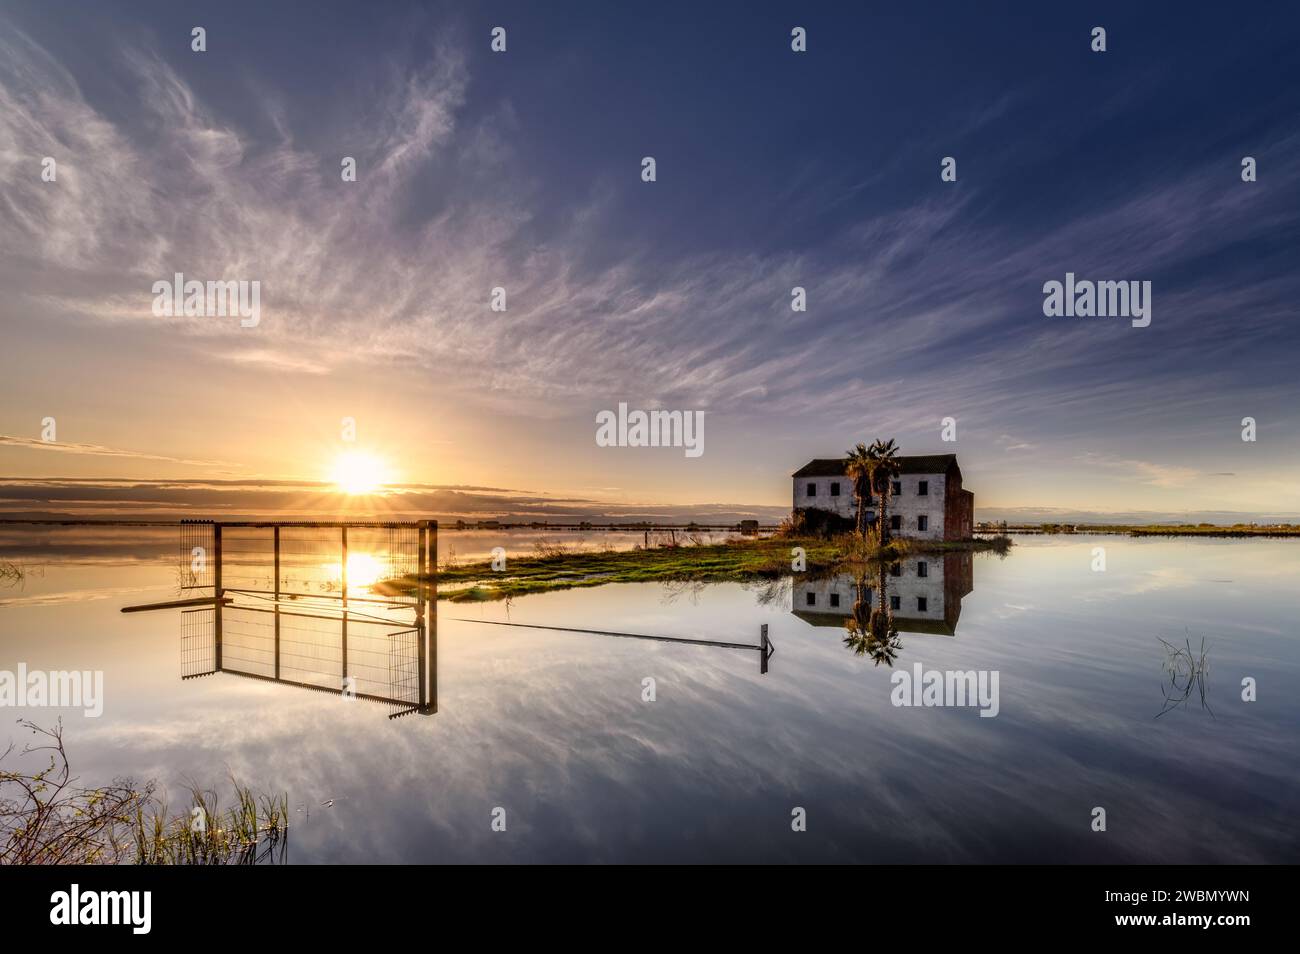 Sunset on the rice fields and flooded road with a rural house with the sun hiding on the horizon and all reflected in the calm water, Sueca, Valencia, Stock Photo